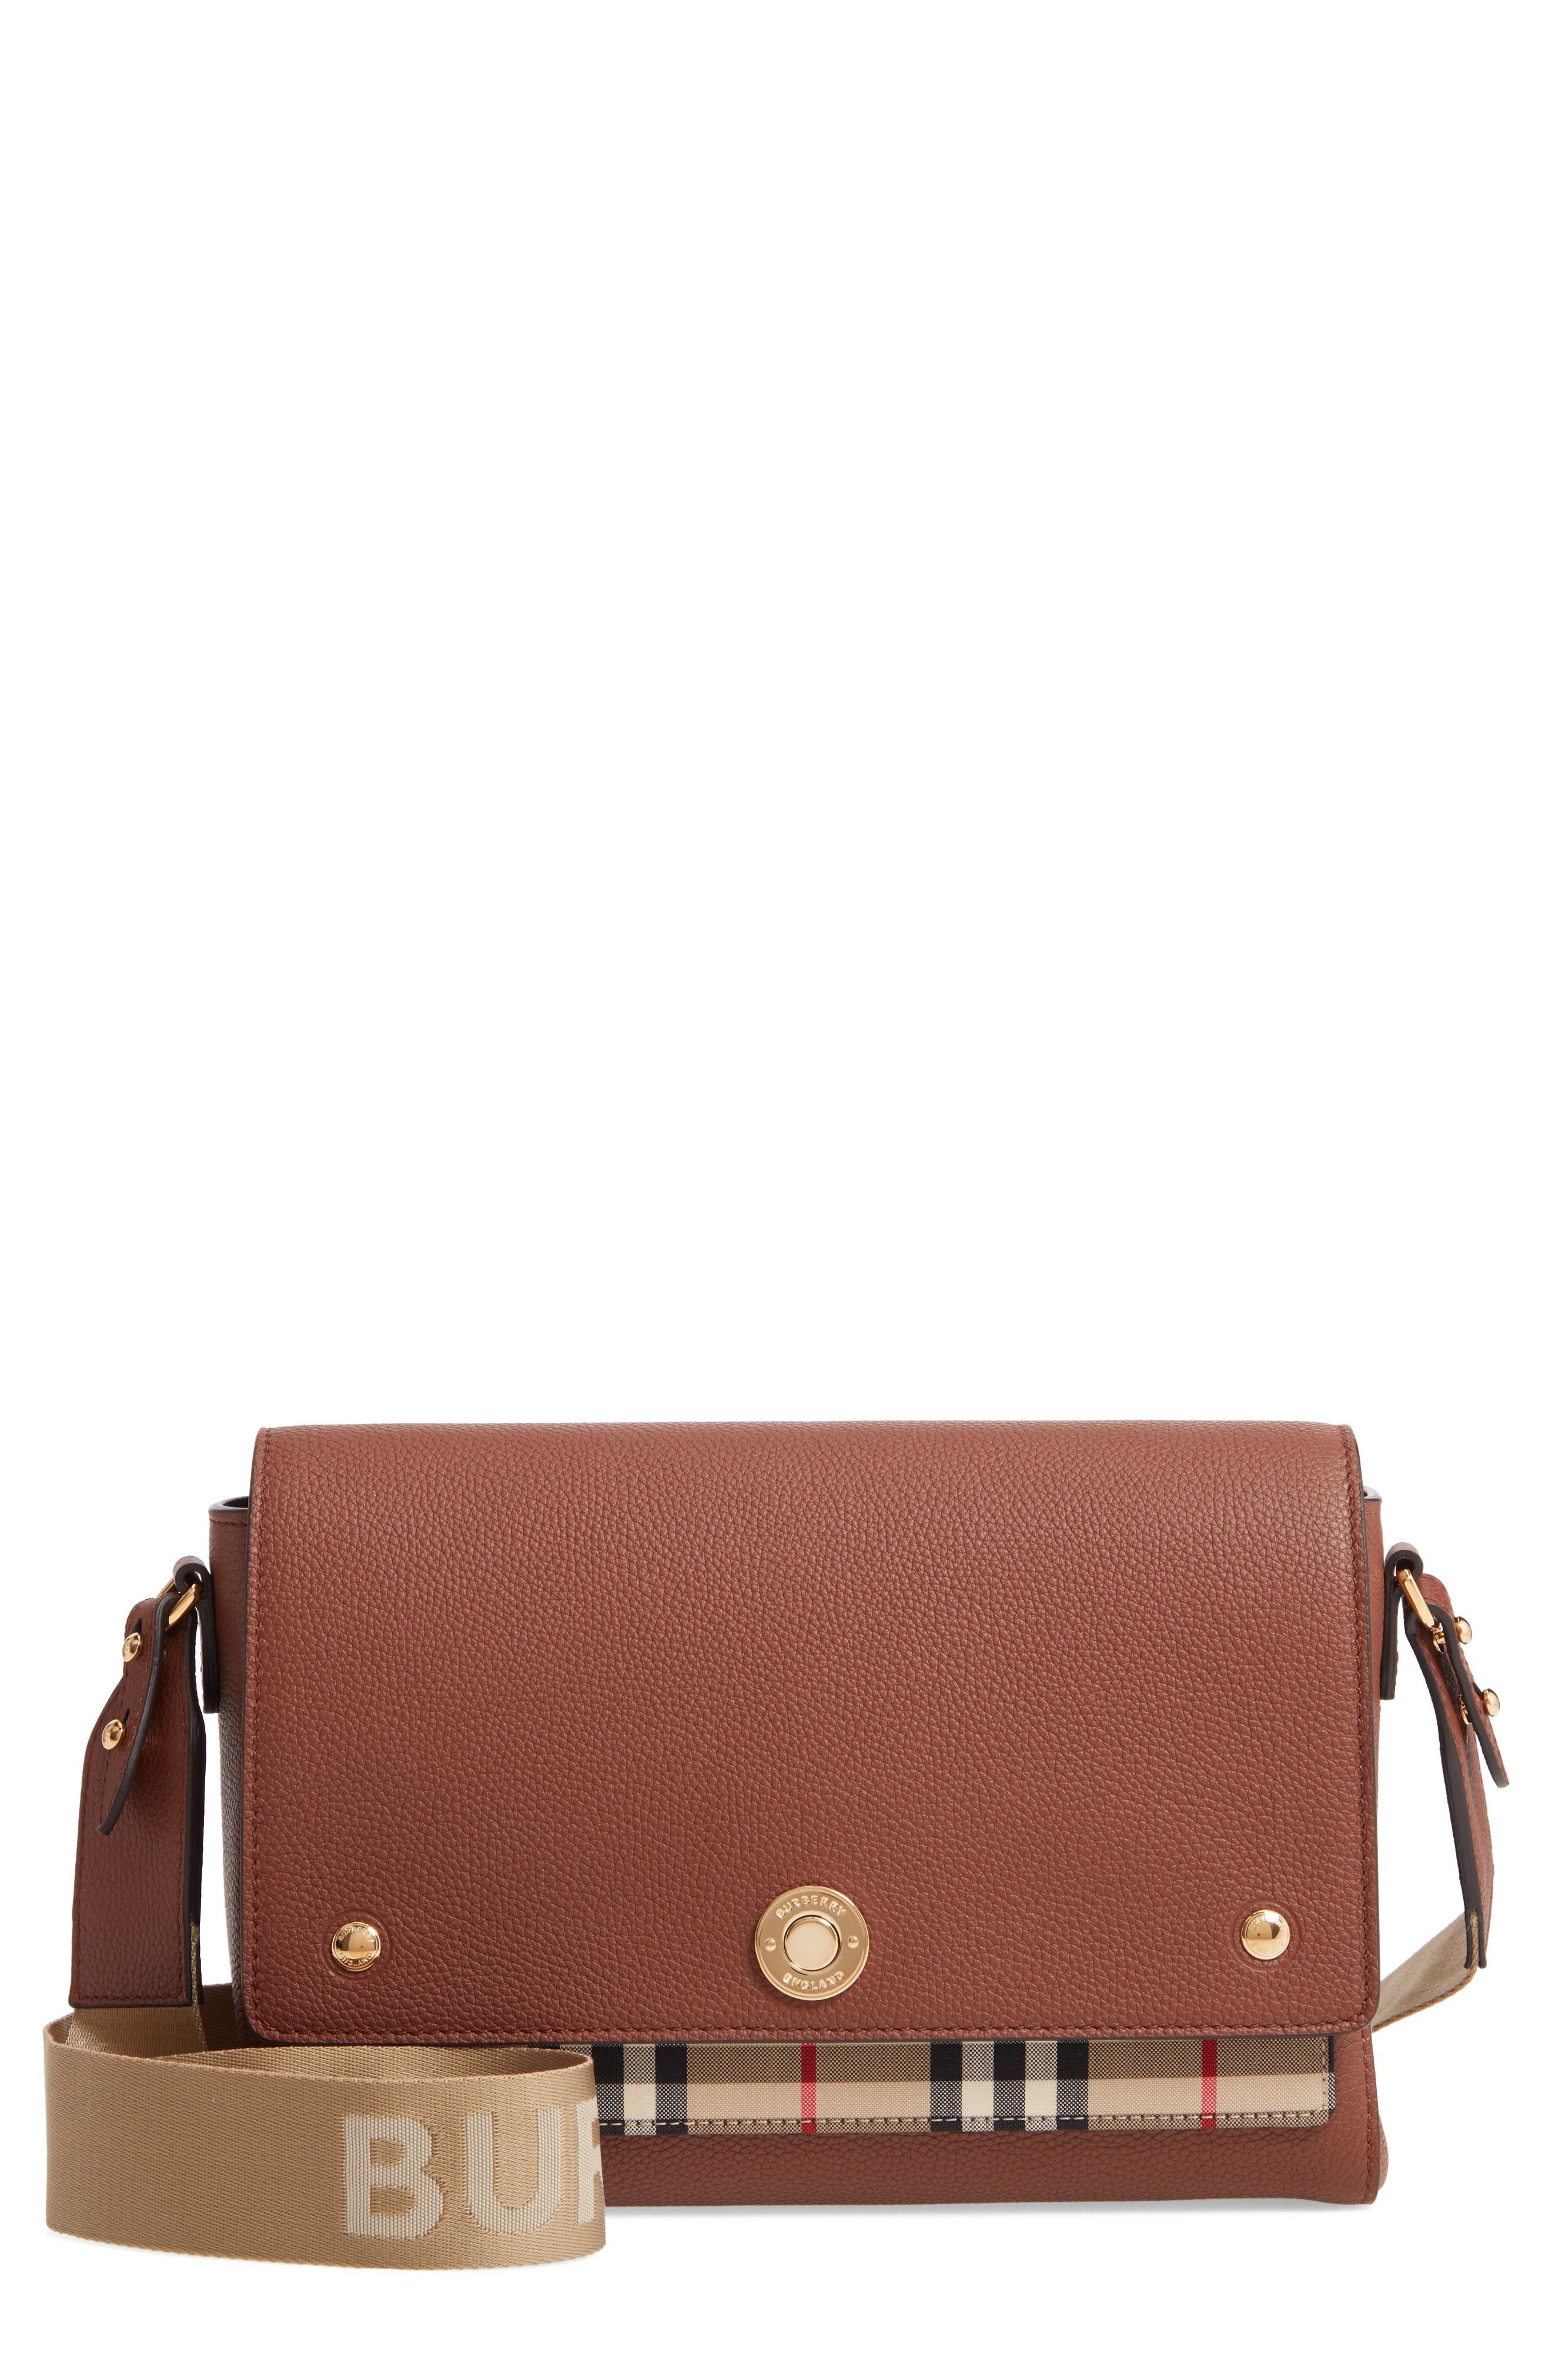 Burberry Note Leather & Vintage Check Crossbody Bag in Tan at Nordstrom